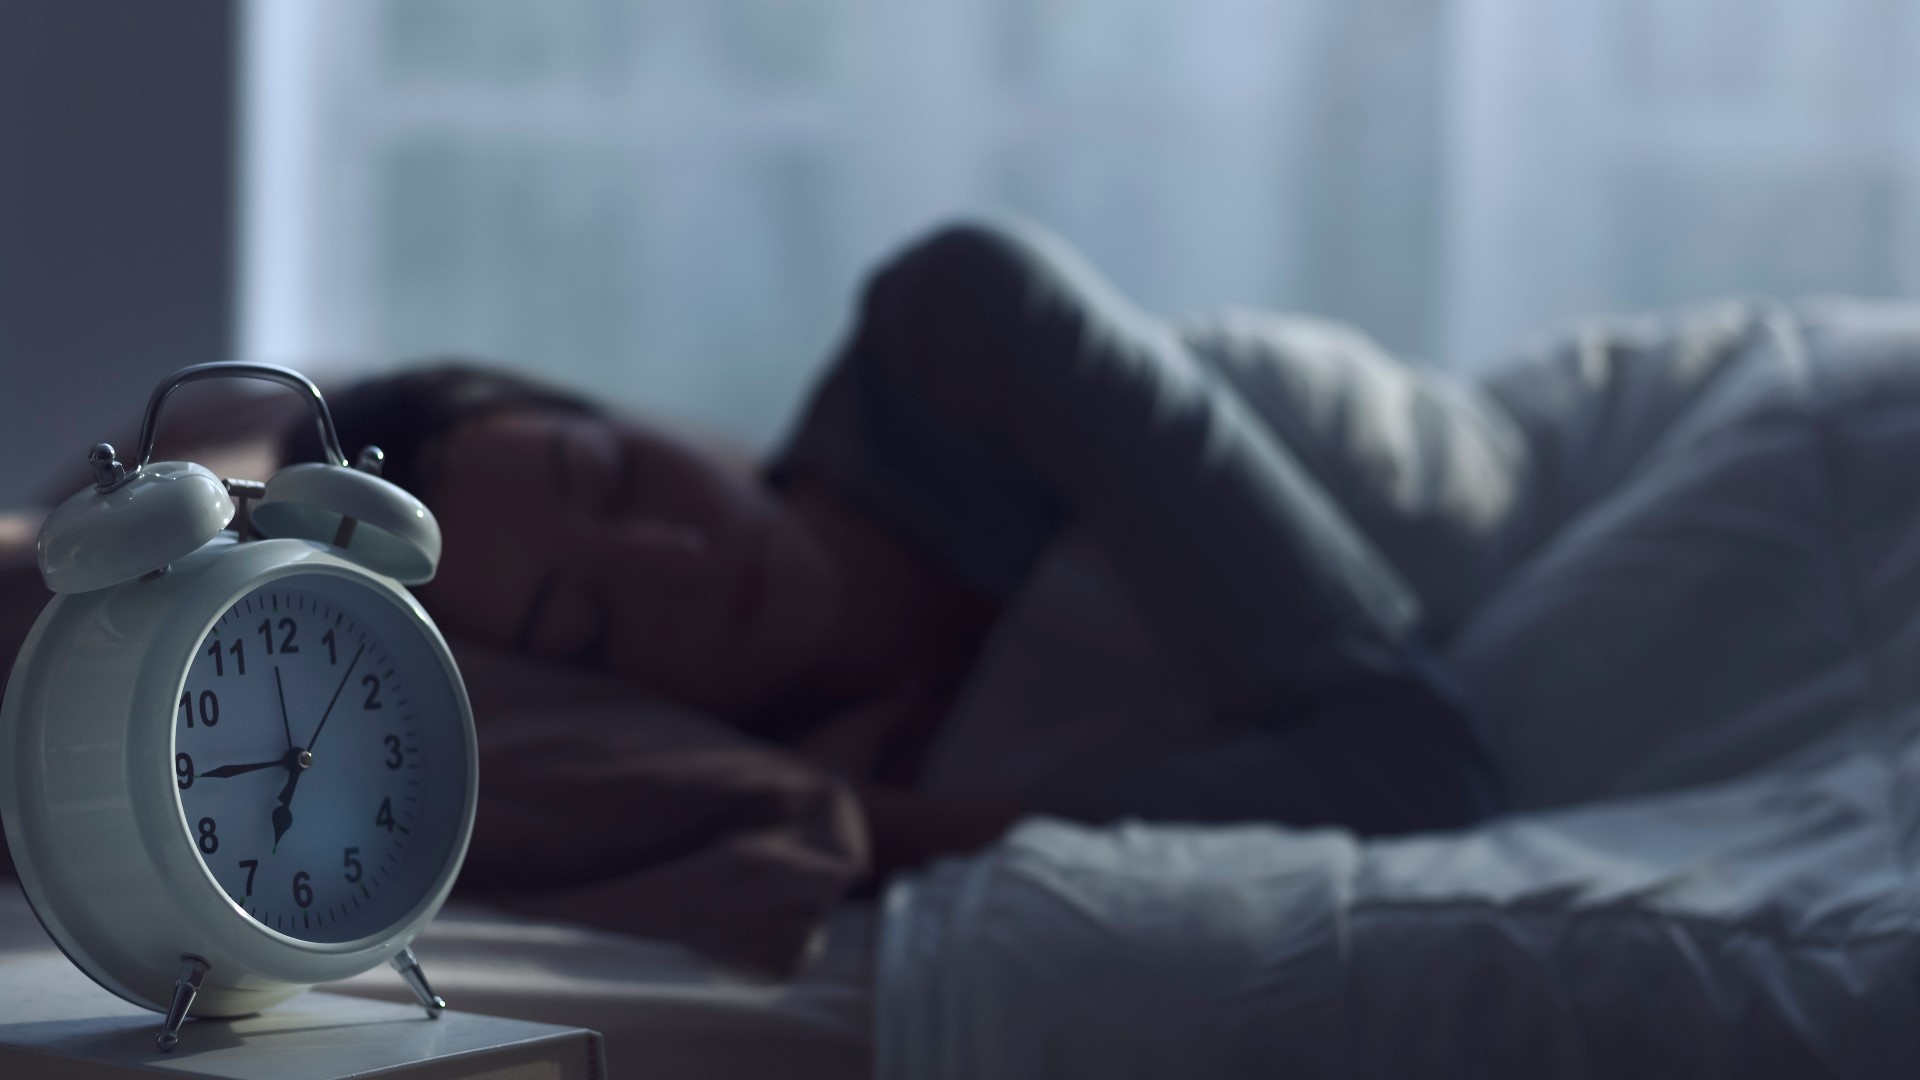 Having trouble falling asleep? Here are some tips on prioritizing sleep.